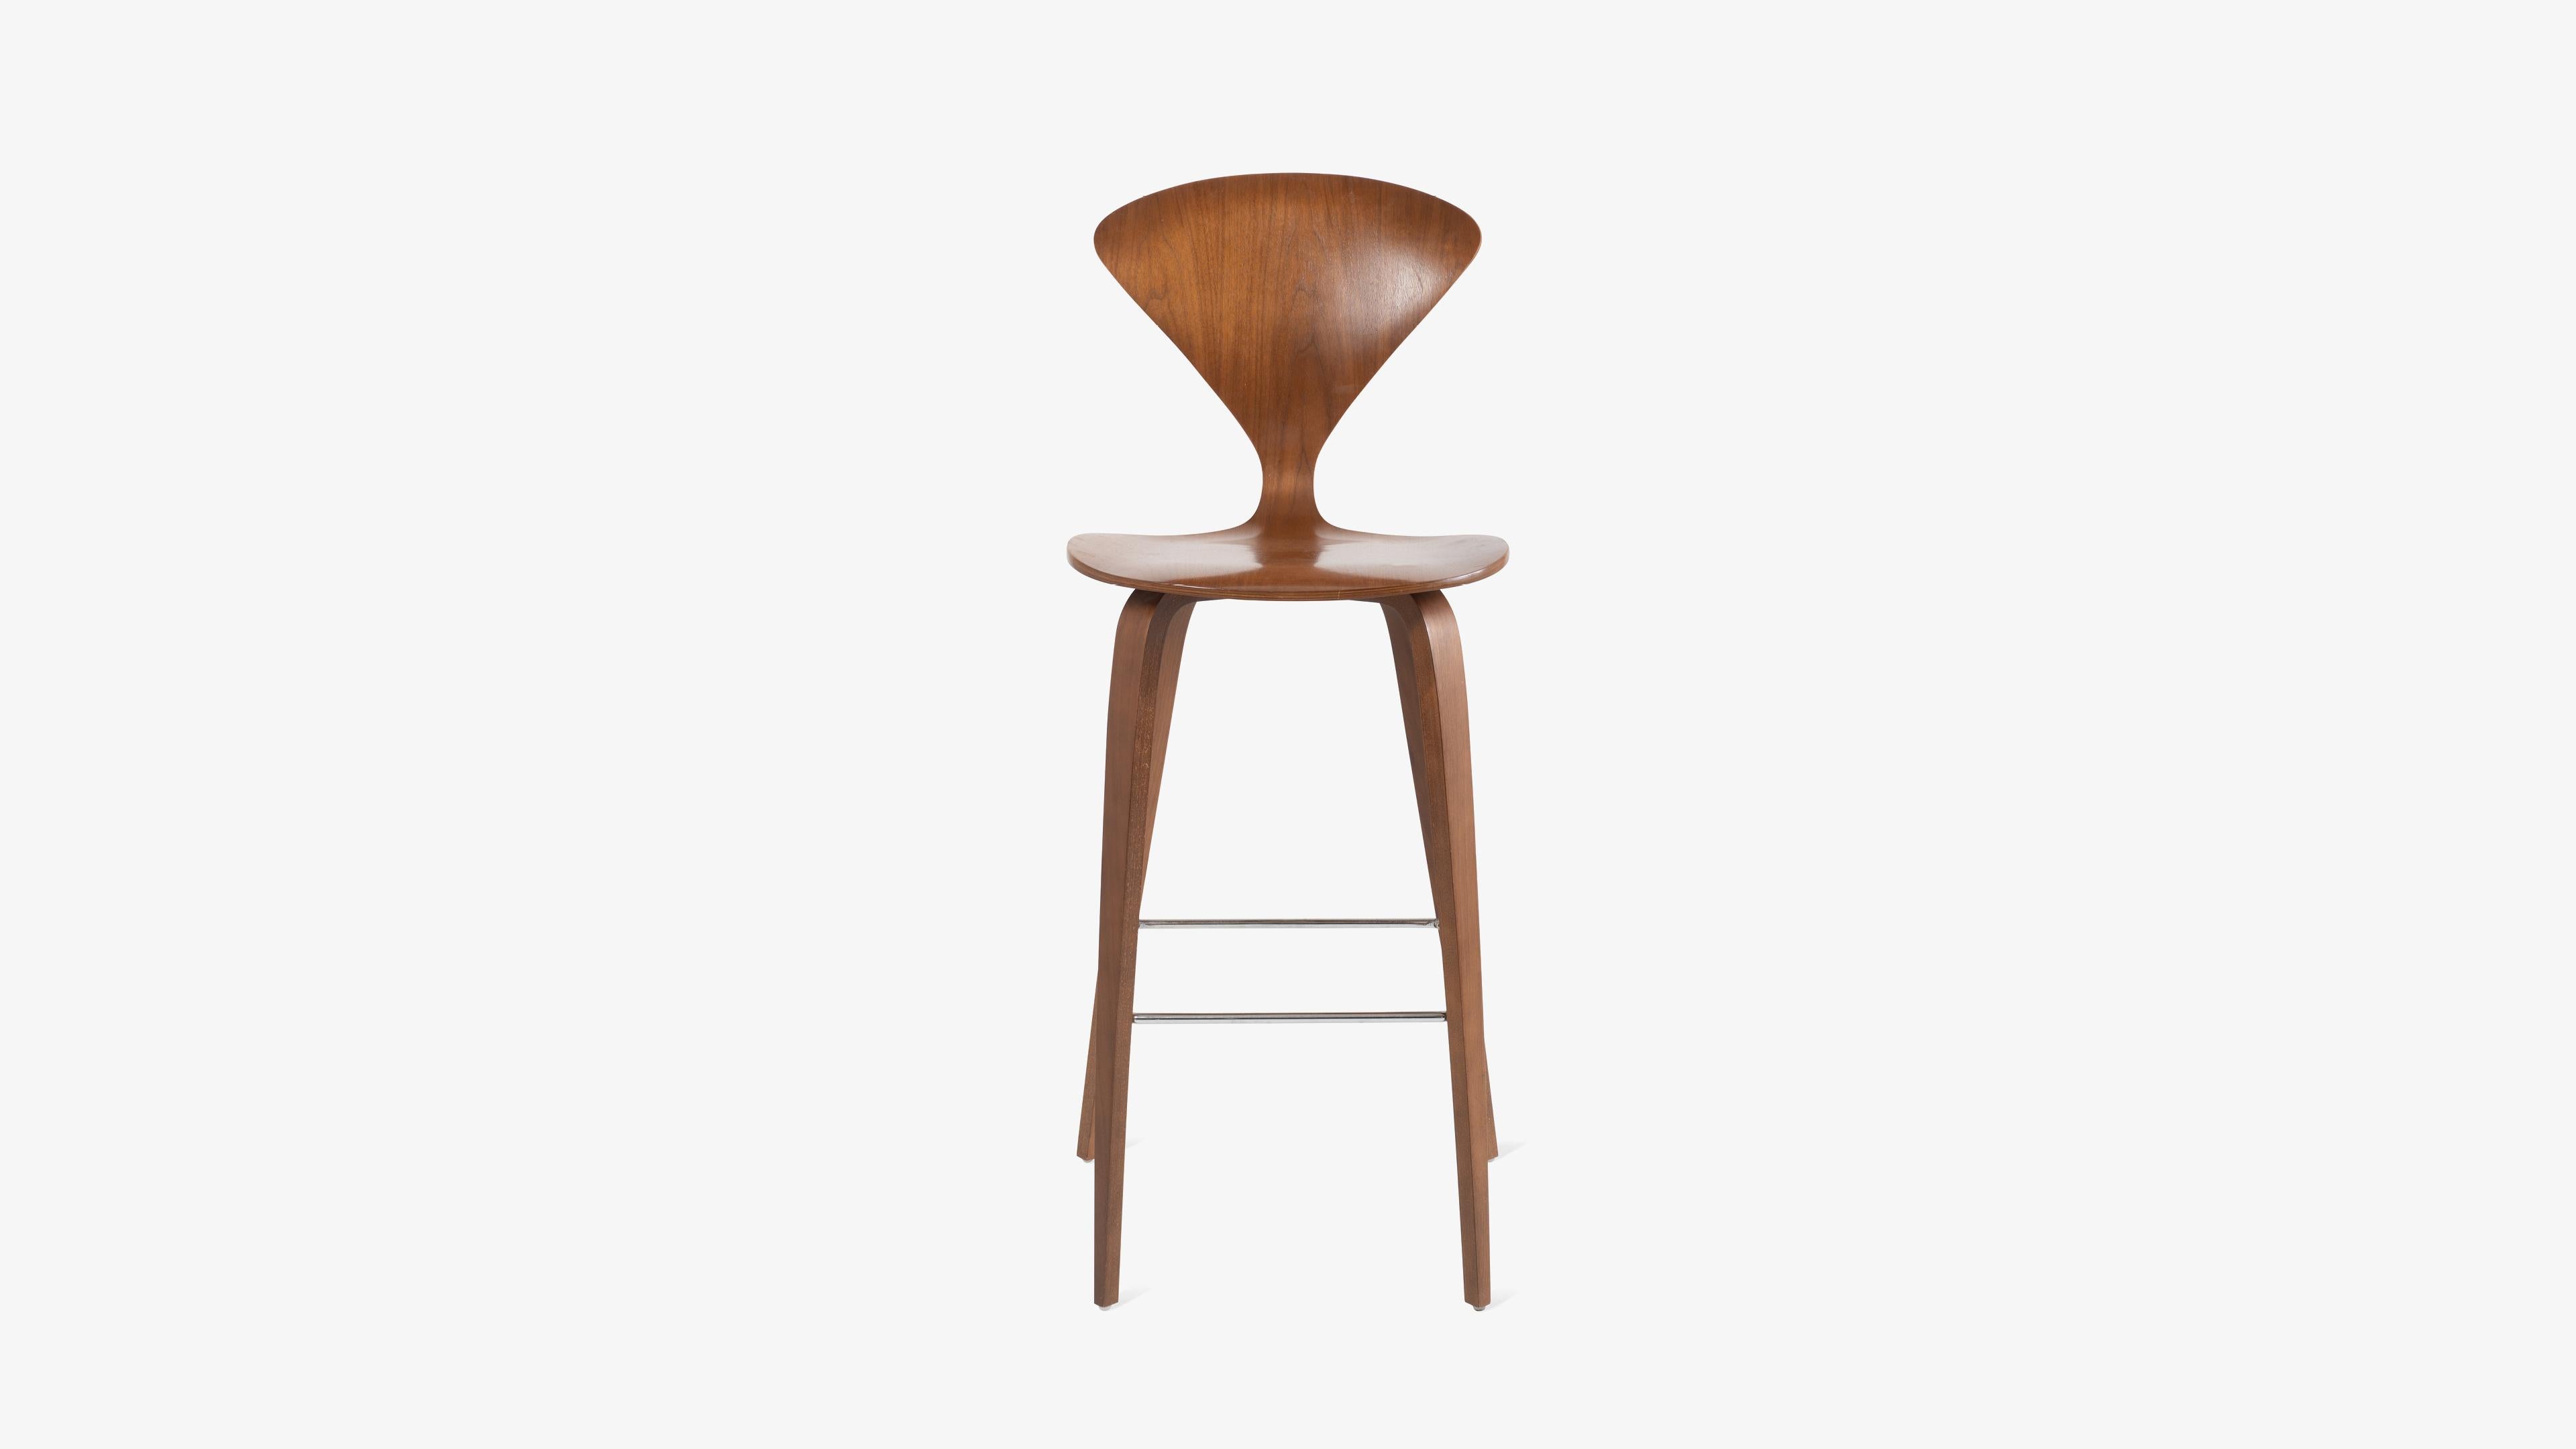 Modernism is an aesthetic which remains relevant and timeless through generational shifts in design and changes in taste. This concept rings true with Norman Cherner’s Counter Stool, a design which is immediately recognizable, telling of Cherner’s